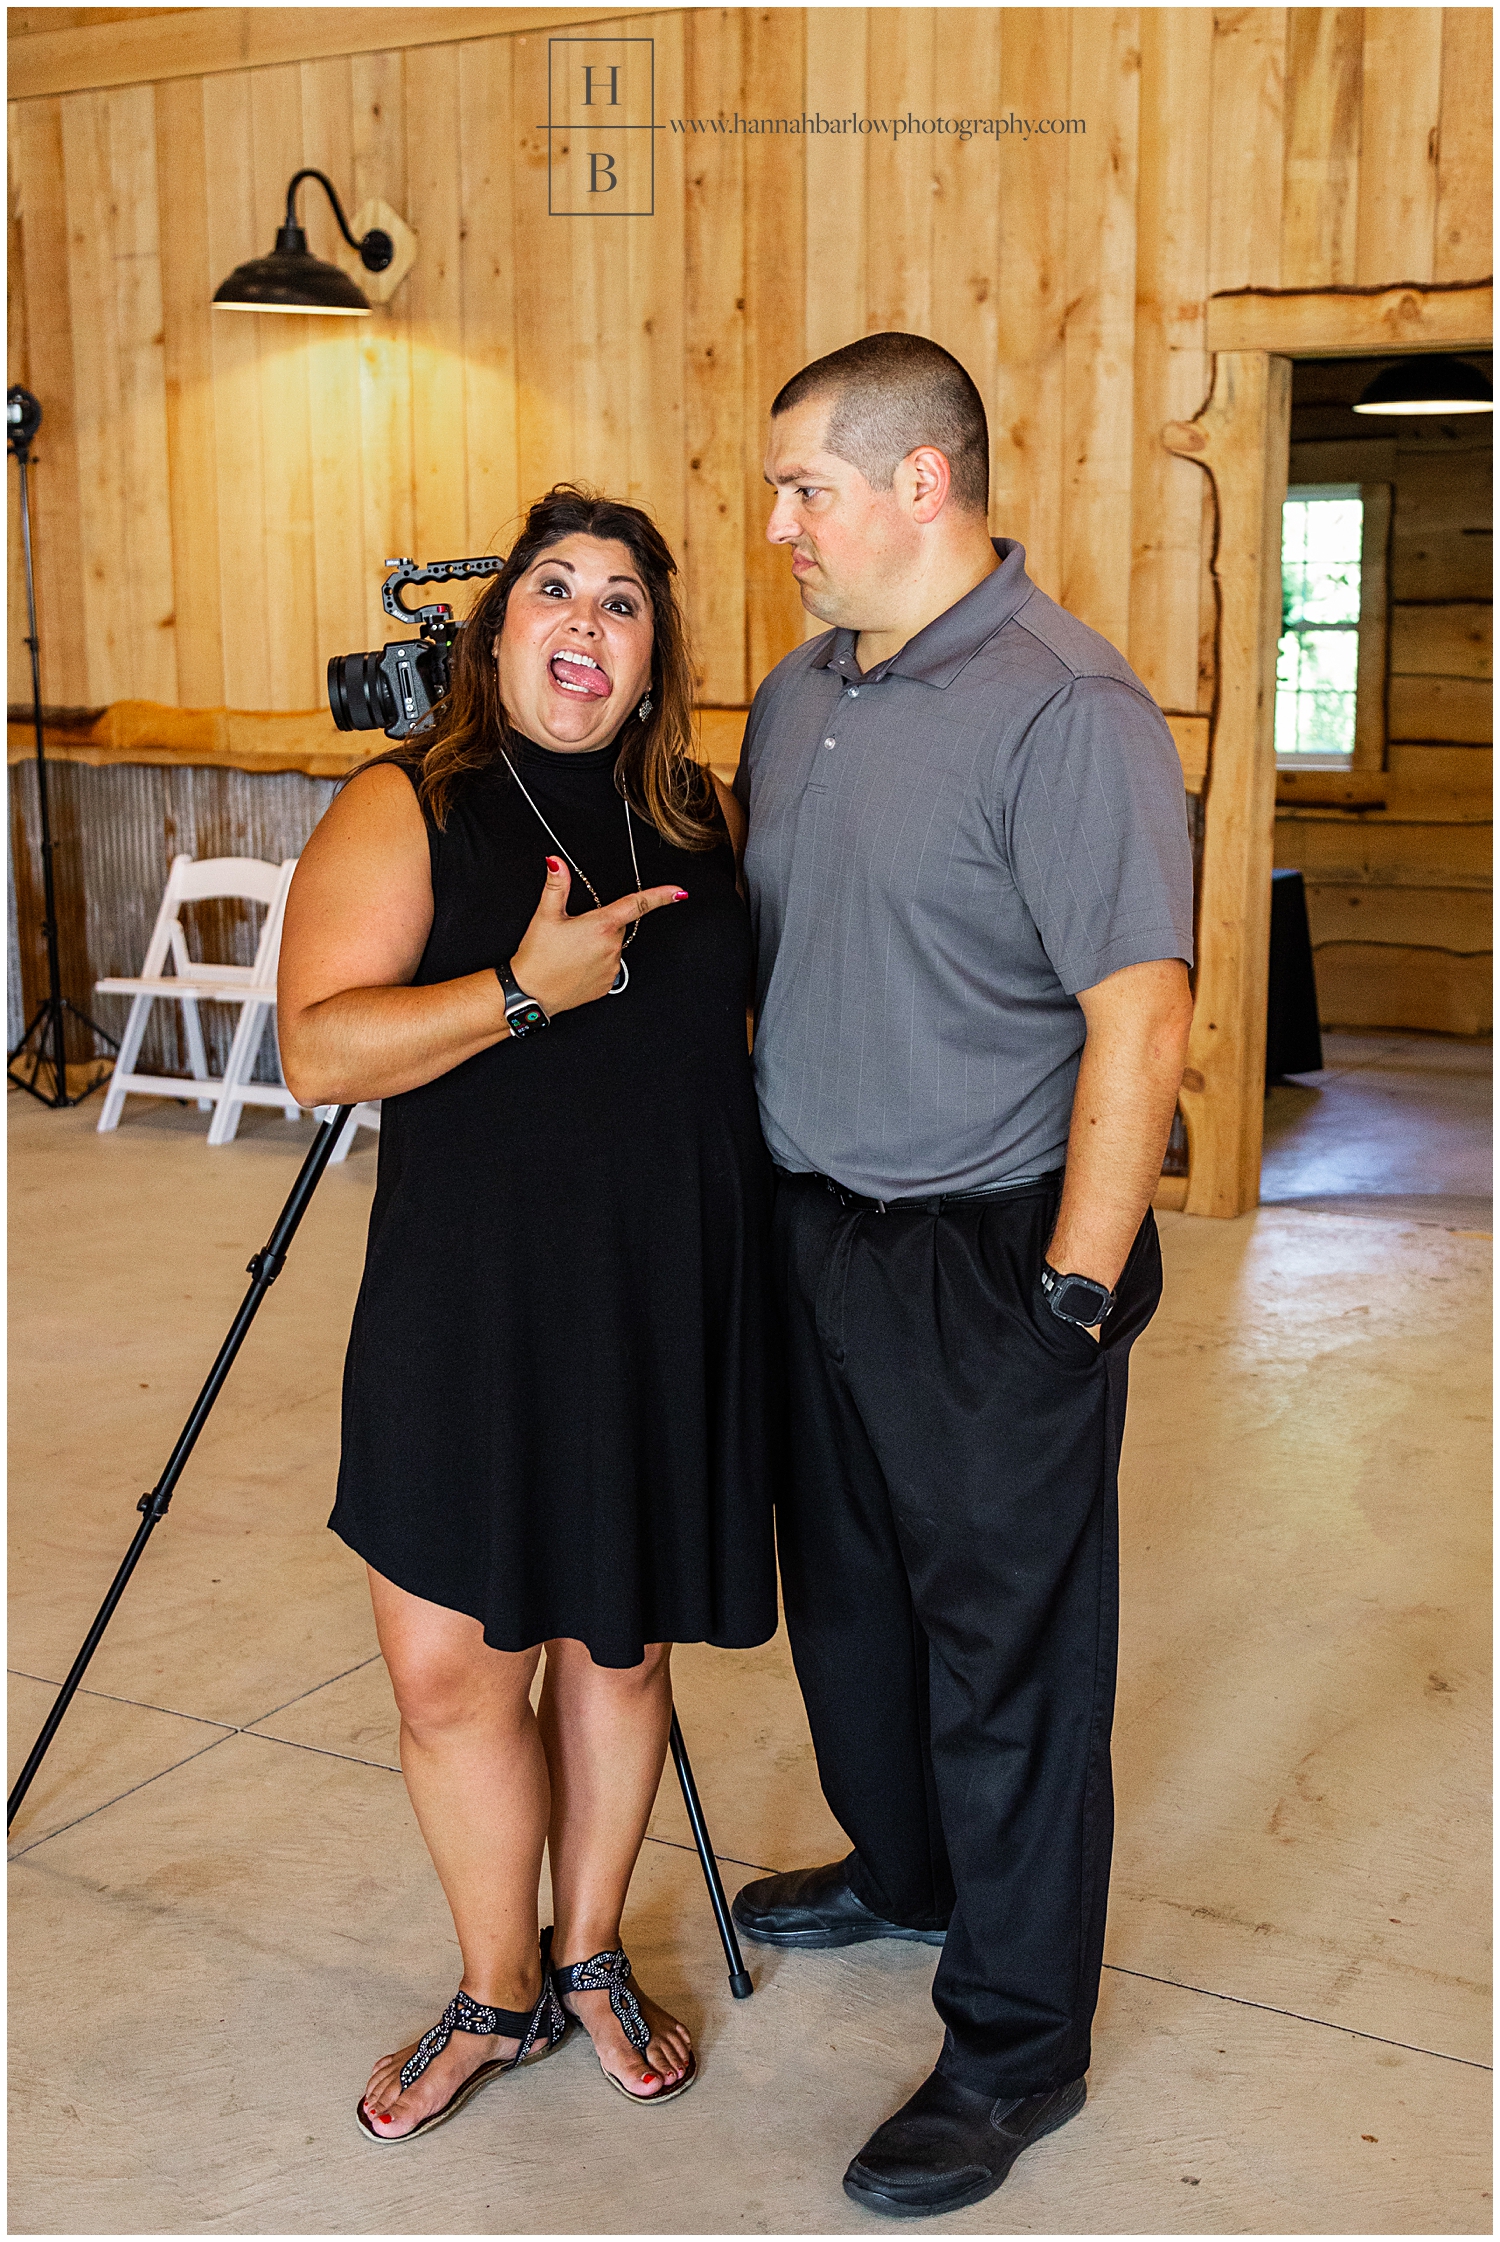 Videographers make funny faces at one another.